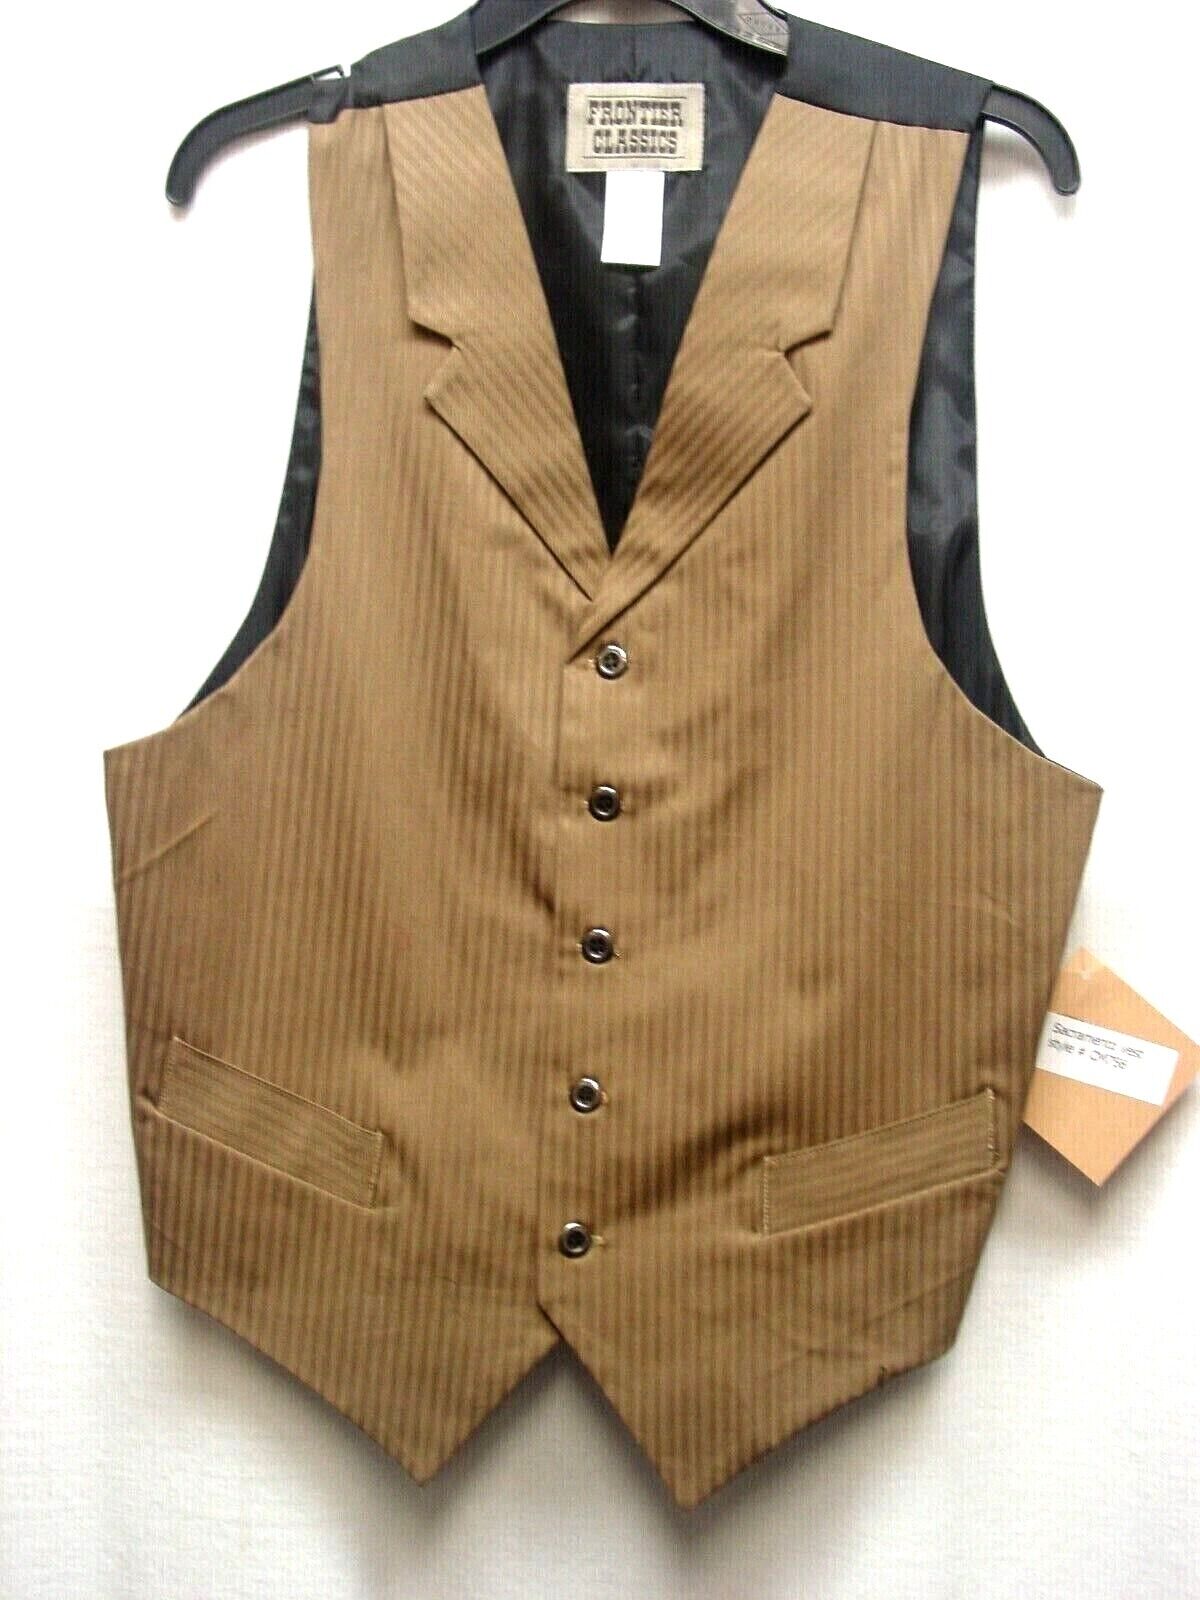 Vest Old West Frontier Vintage Victorian style Tan Stripe with pockets CLOSEOUT